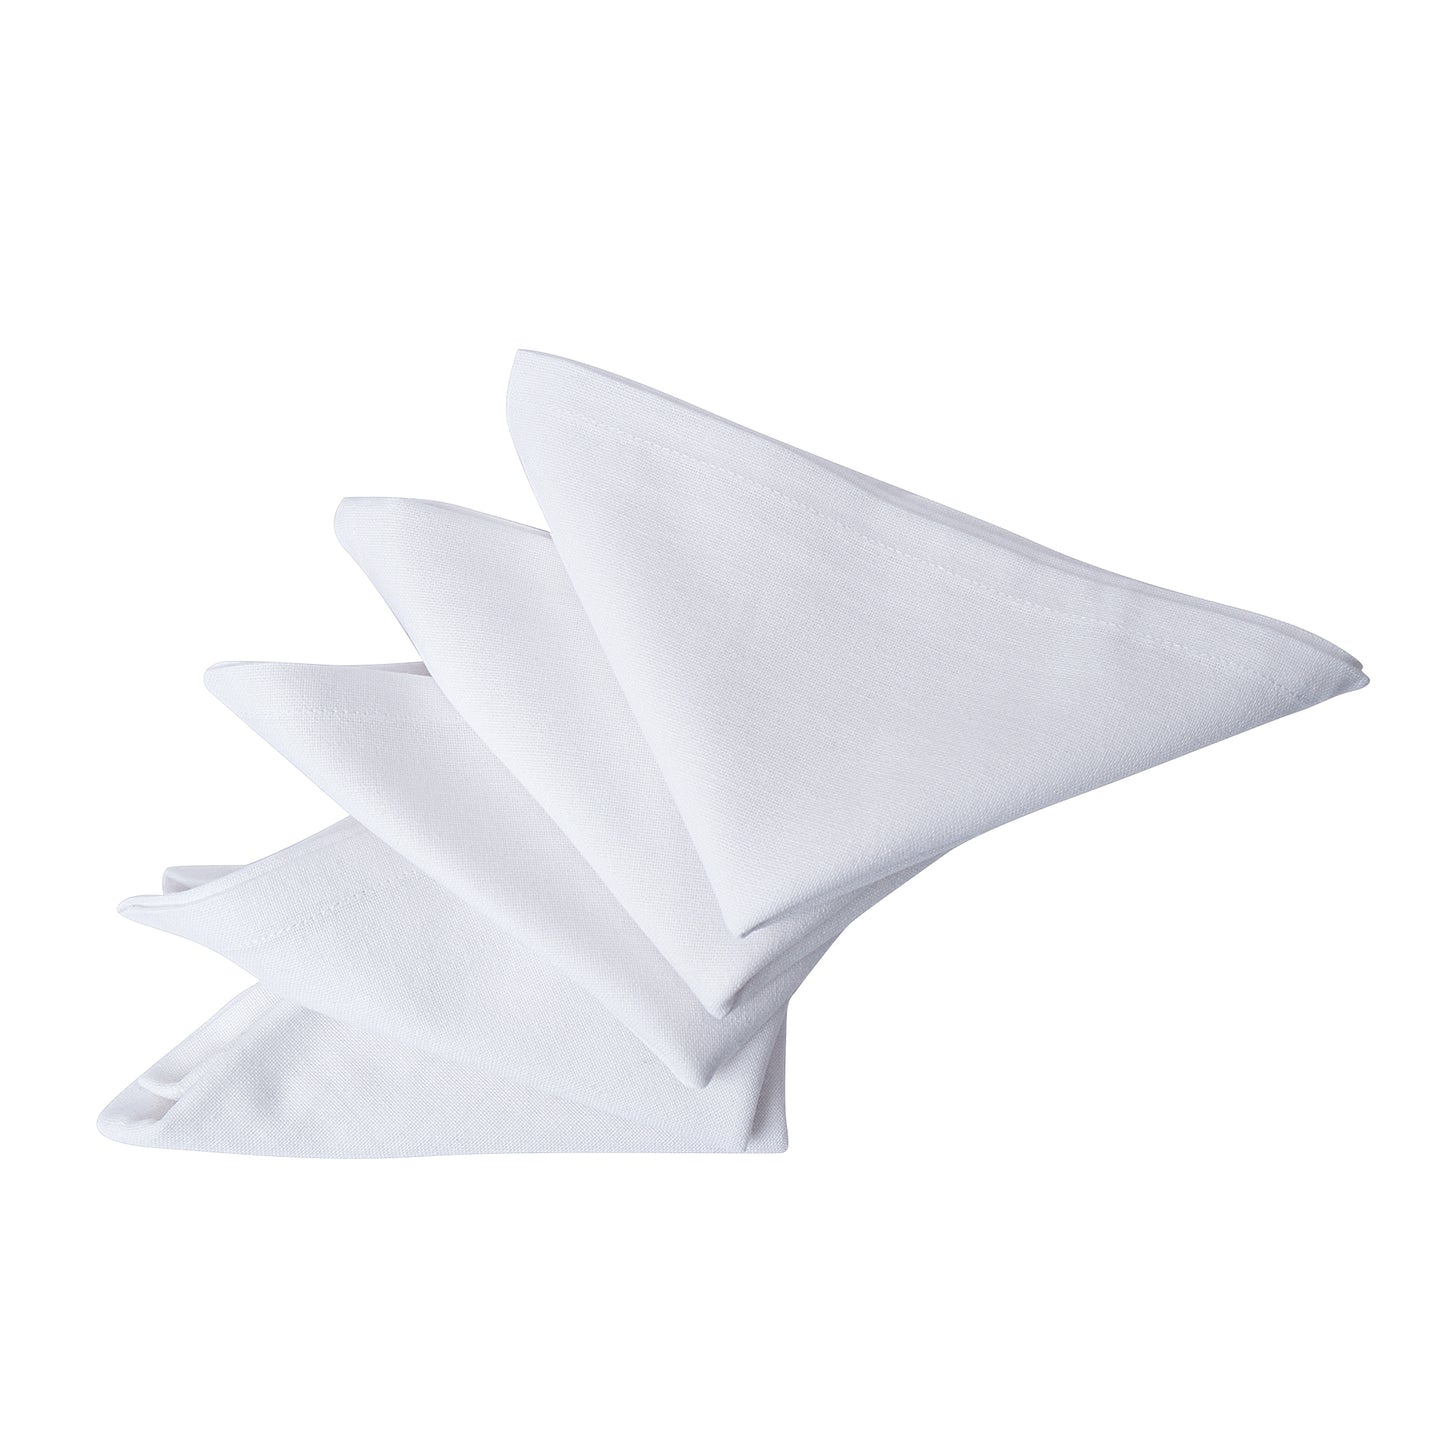 100% Pure Every Day Use Cotton Cloth Dinner Napkins Set Of 12 - Solid White 18 X 18 Inch